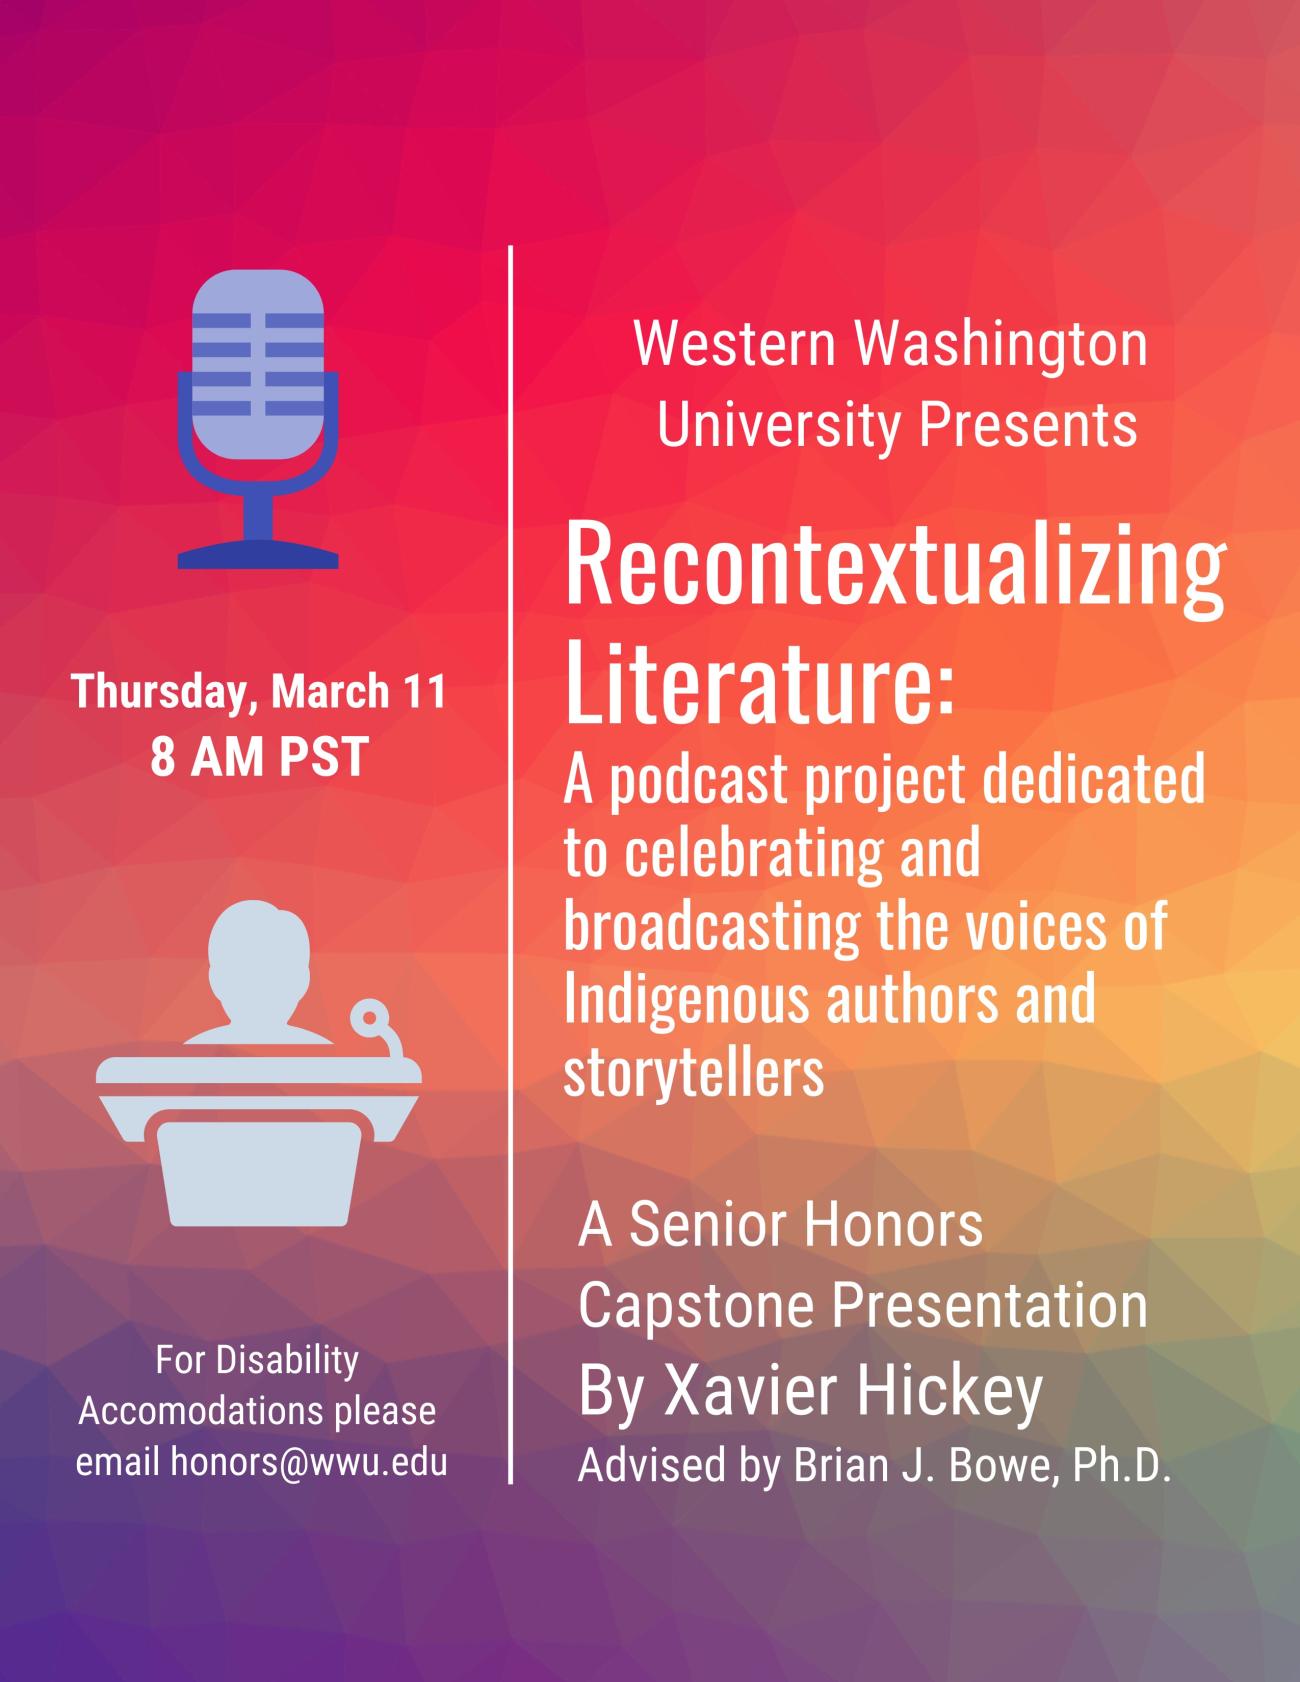 Text reads: “Western Washington University Presents: Recontextualizing Literature: a podcast project dedicated to celebrating and broadcasting the voices of Indigenous authors and storytellers. A Senior Honors Capstone Presentation by Xavier Hickey. Advised by Brian J. Bowe, Ph.D. Thursday, March 11. 8 AM PST. For Disability Accommodations please email honors@wwu.edu”. Text is on a red-to-blue gradient background.  To the left are cartoon graphics of a microphone and a speaker at a podium. 